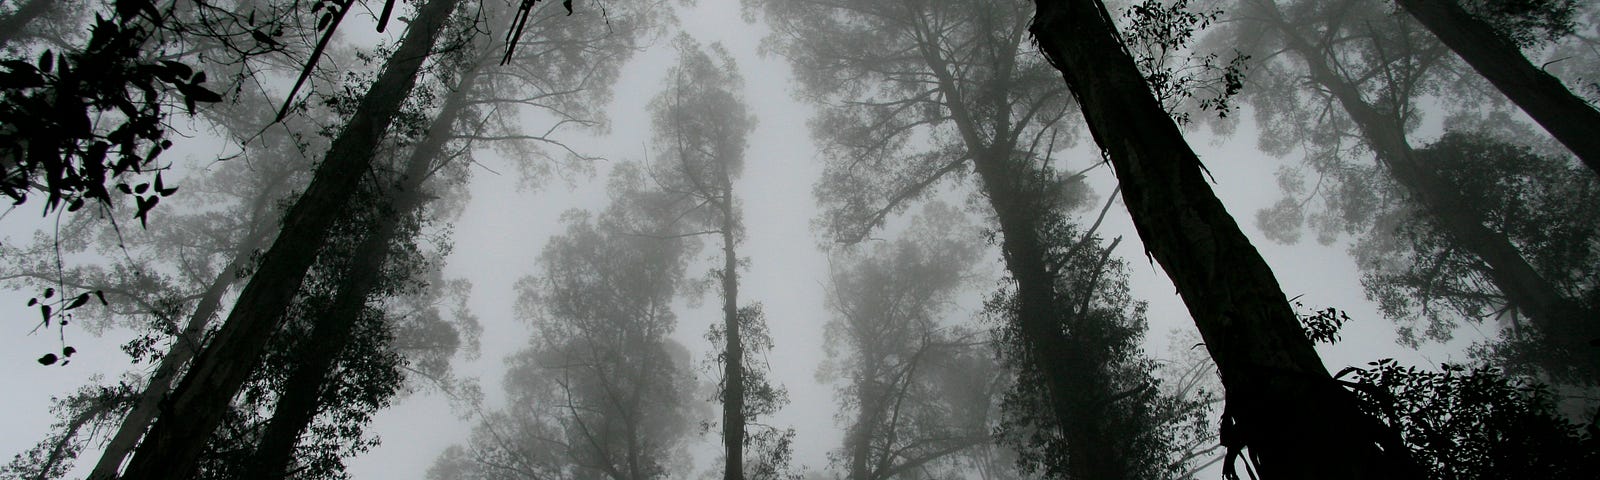 black and white photograph seemingly taken while someone was laying on the forest ground looking up at the tall thin pine trees through the fog and mist